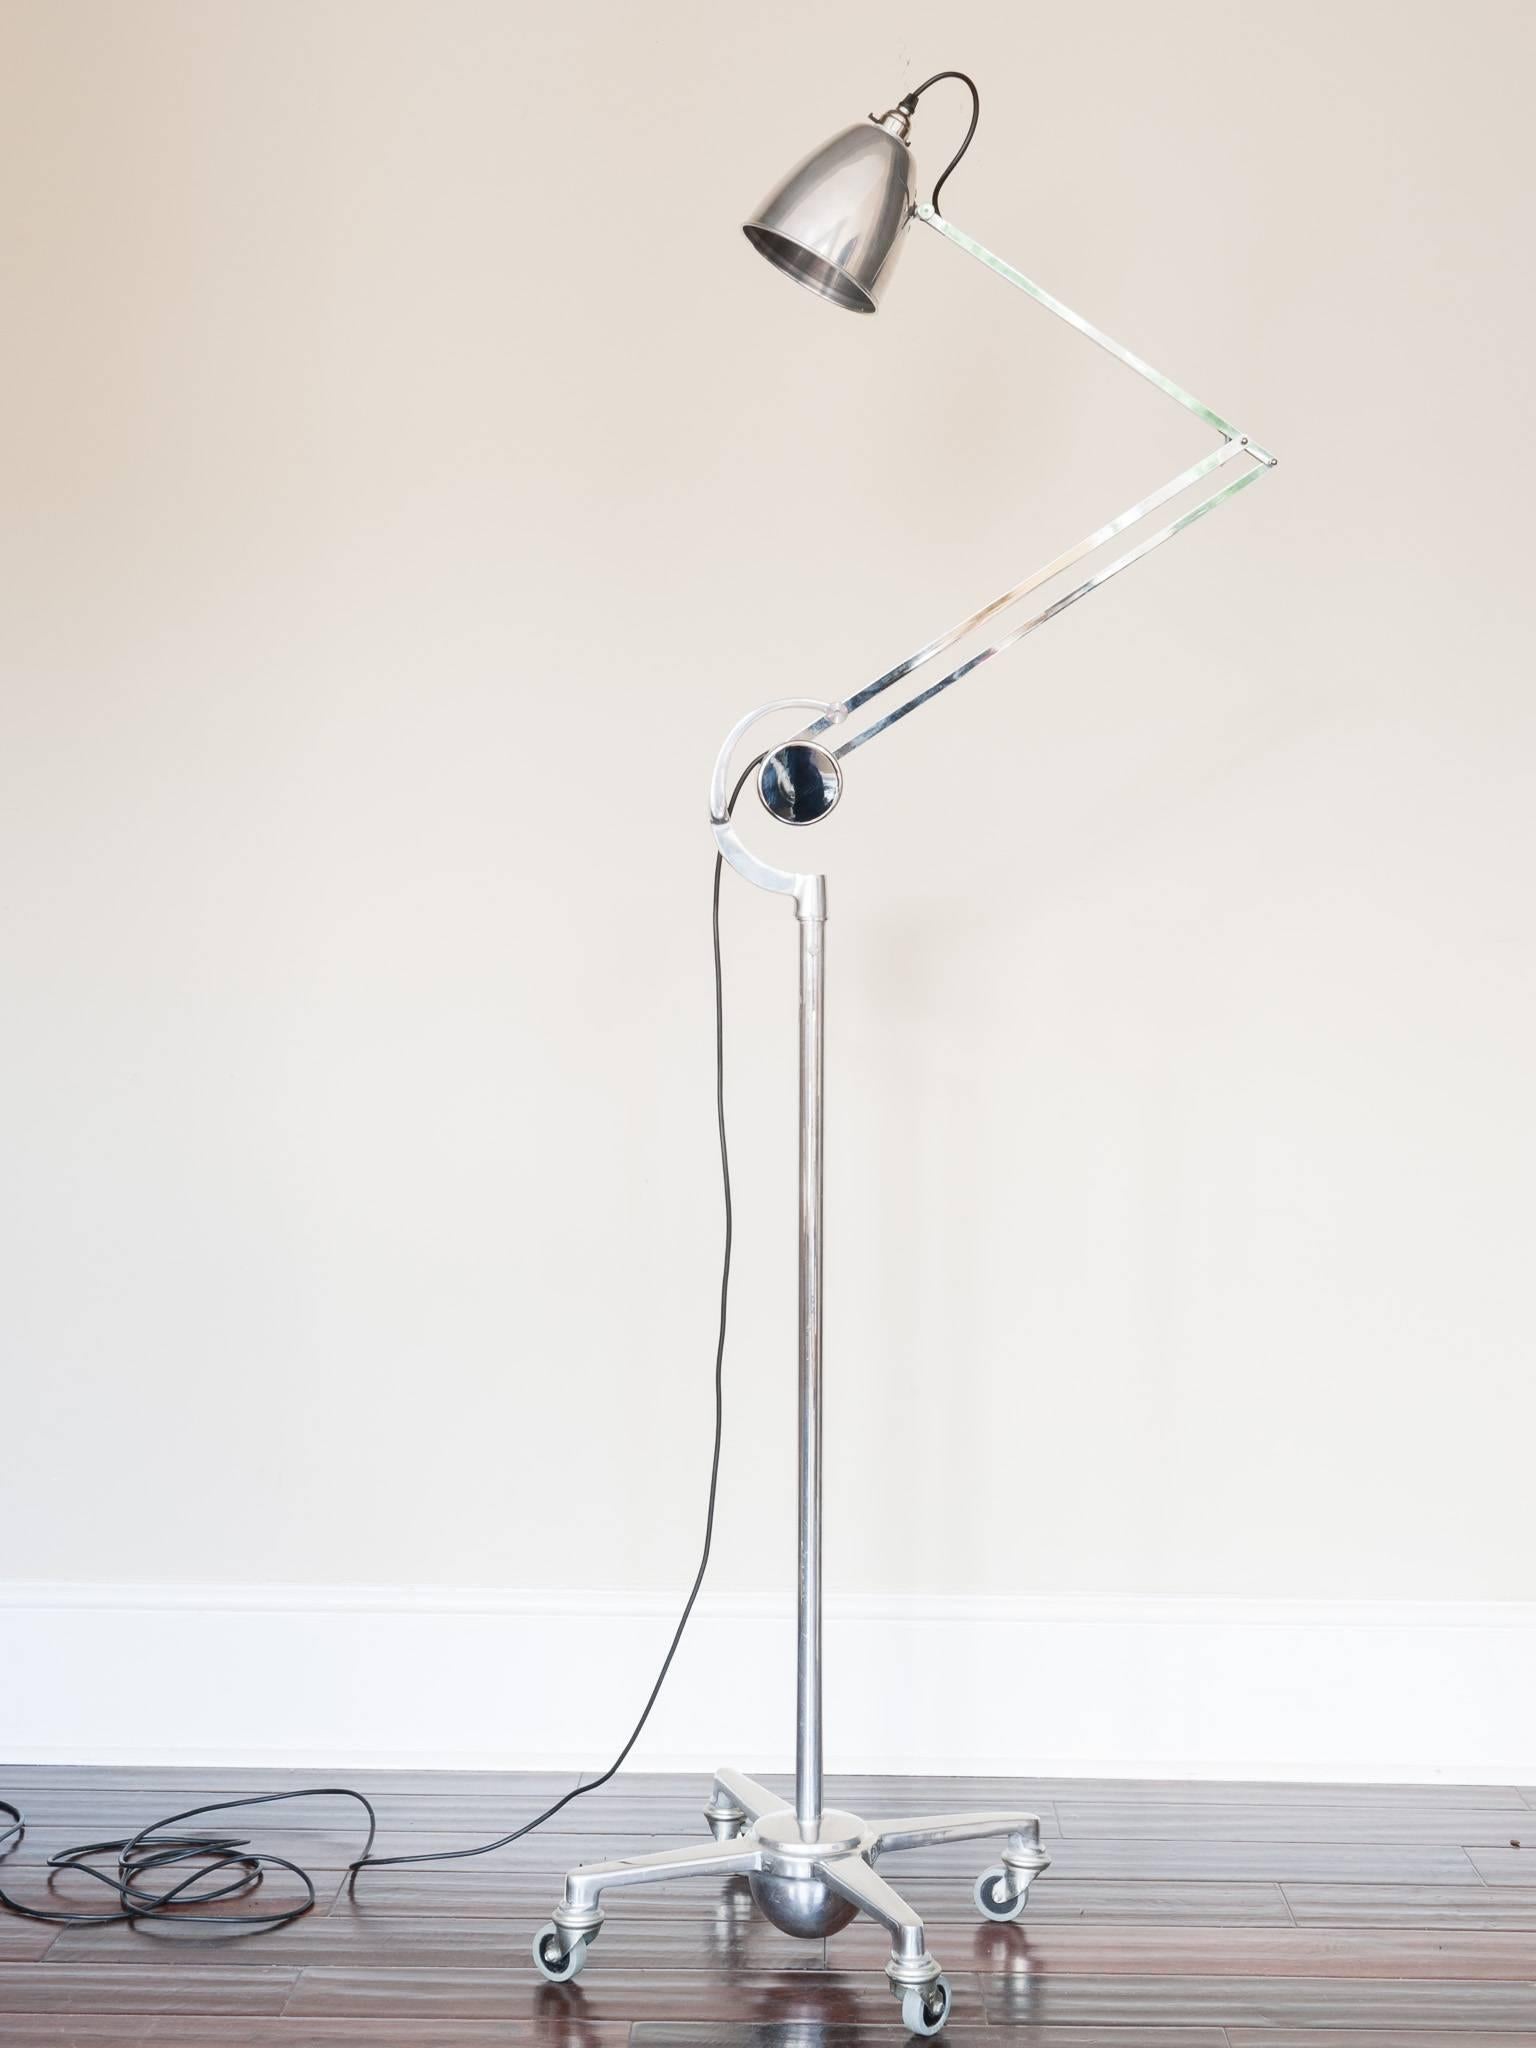 1950s British made fully-chromed counterpoise trolley floor lamp manufactured by Hadrill & Horstmann. The vertical rise separates into two pieces and is detachable from the base for ease of transport. The stand sits in a four-legged weighted base